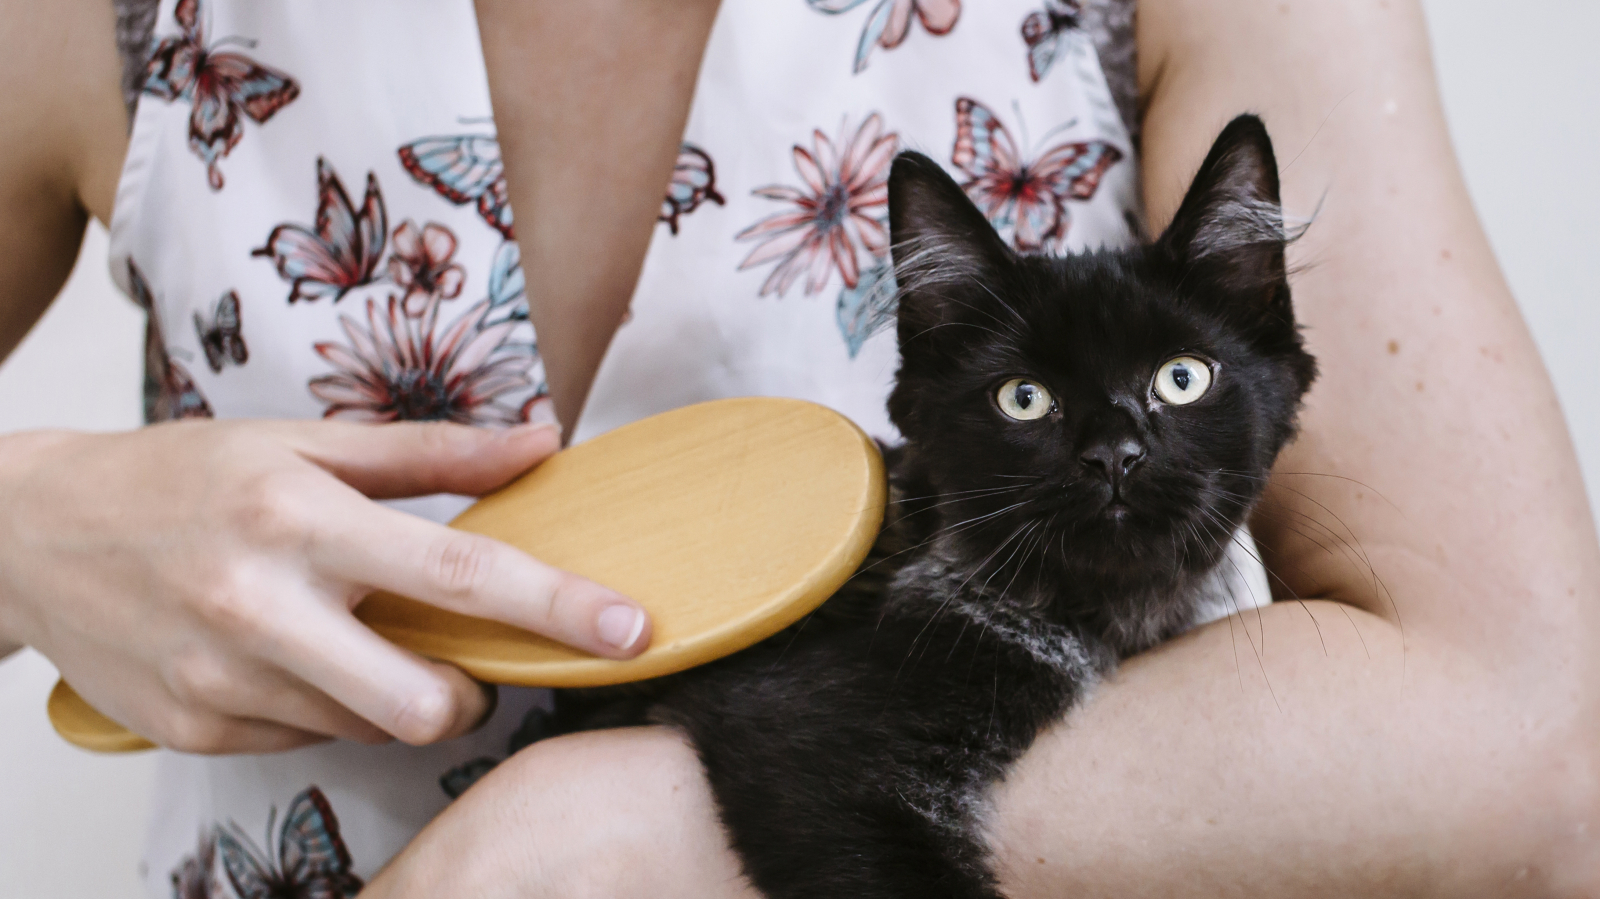 A black cat with tufty ears sits on the lap of a woman. The woman brushes the cat's body.